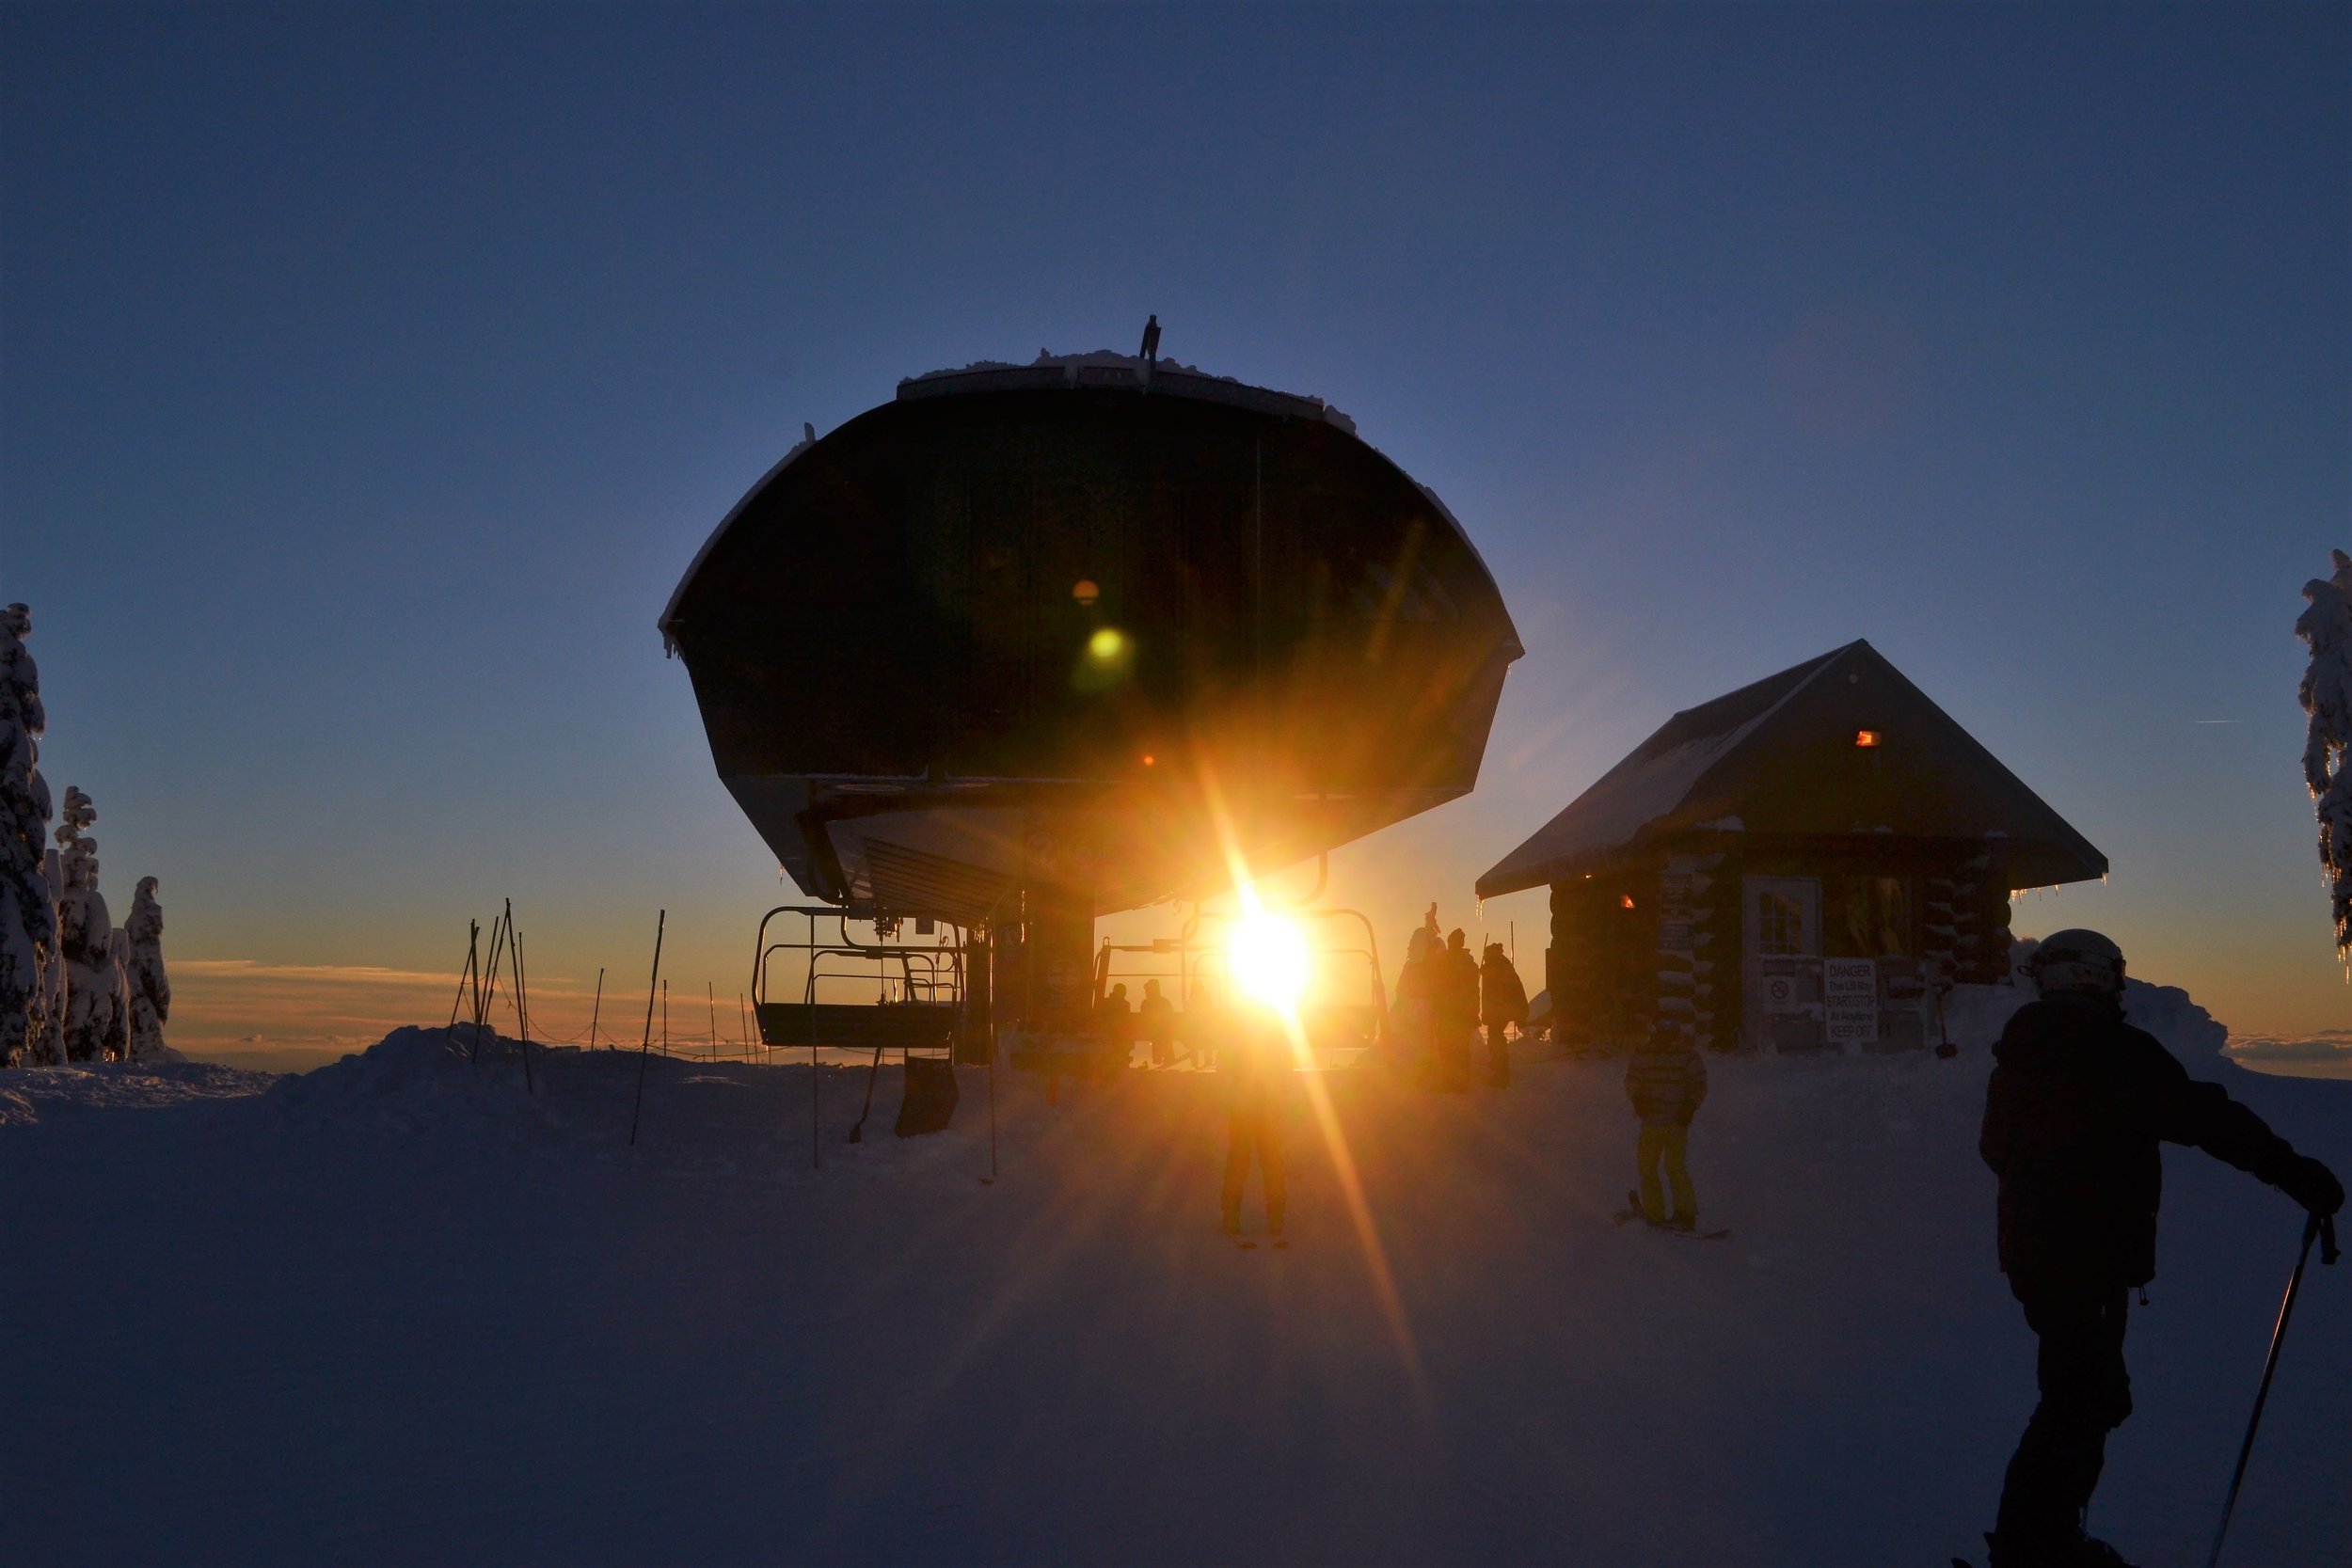 Sunsetting at one of the chairlifts at the local mountains in Vancouver